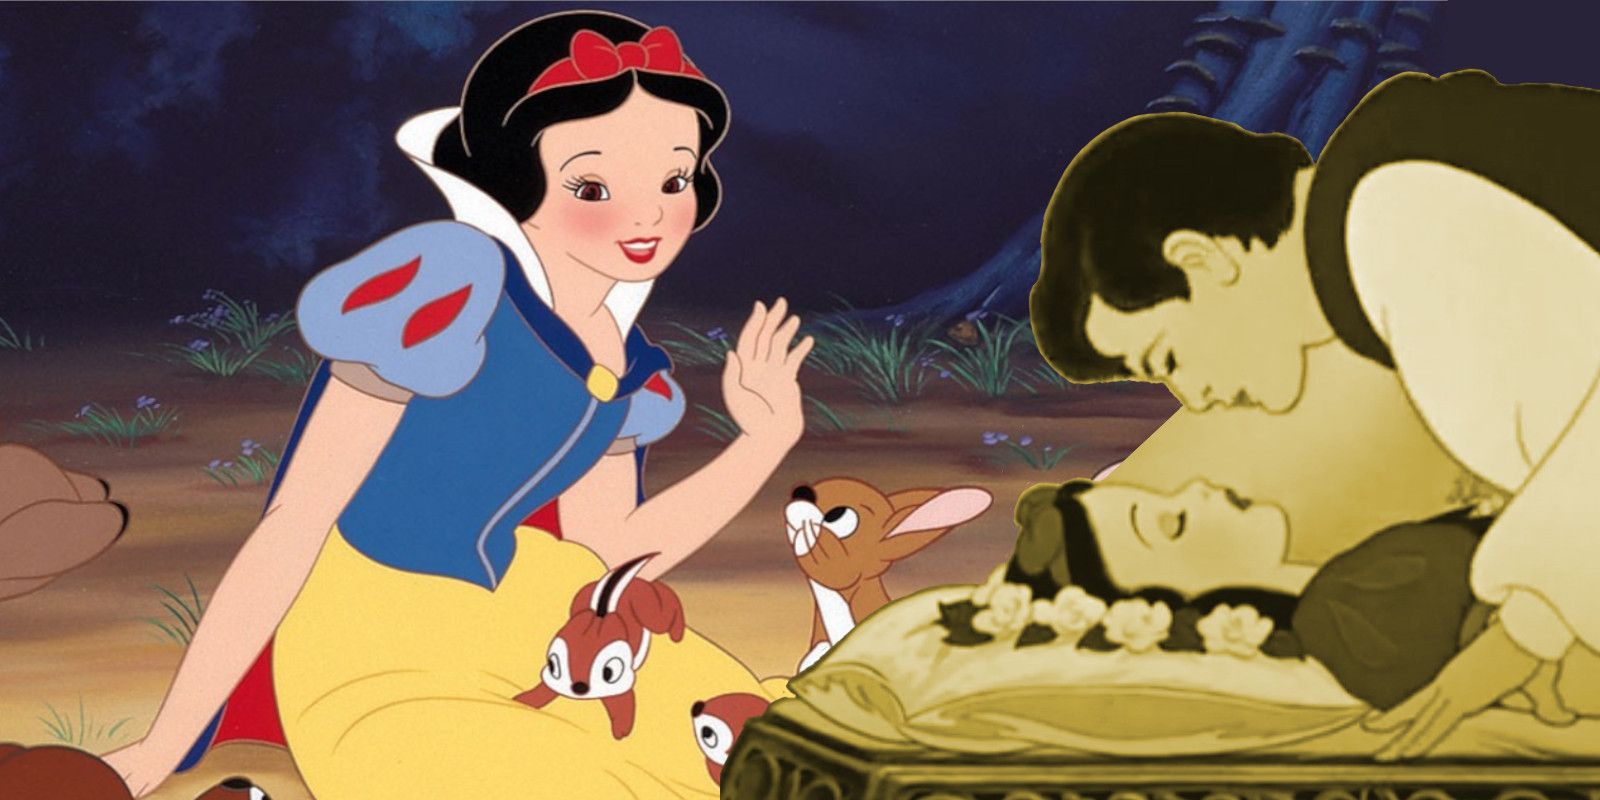 Snow White and the Seven Dwarfs' Re-Released, Novelized, and More